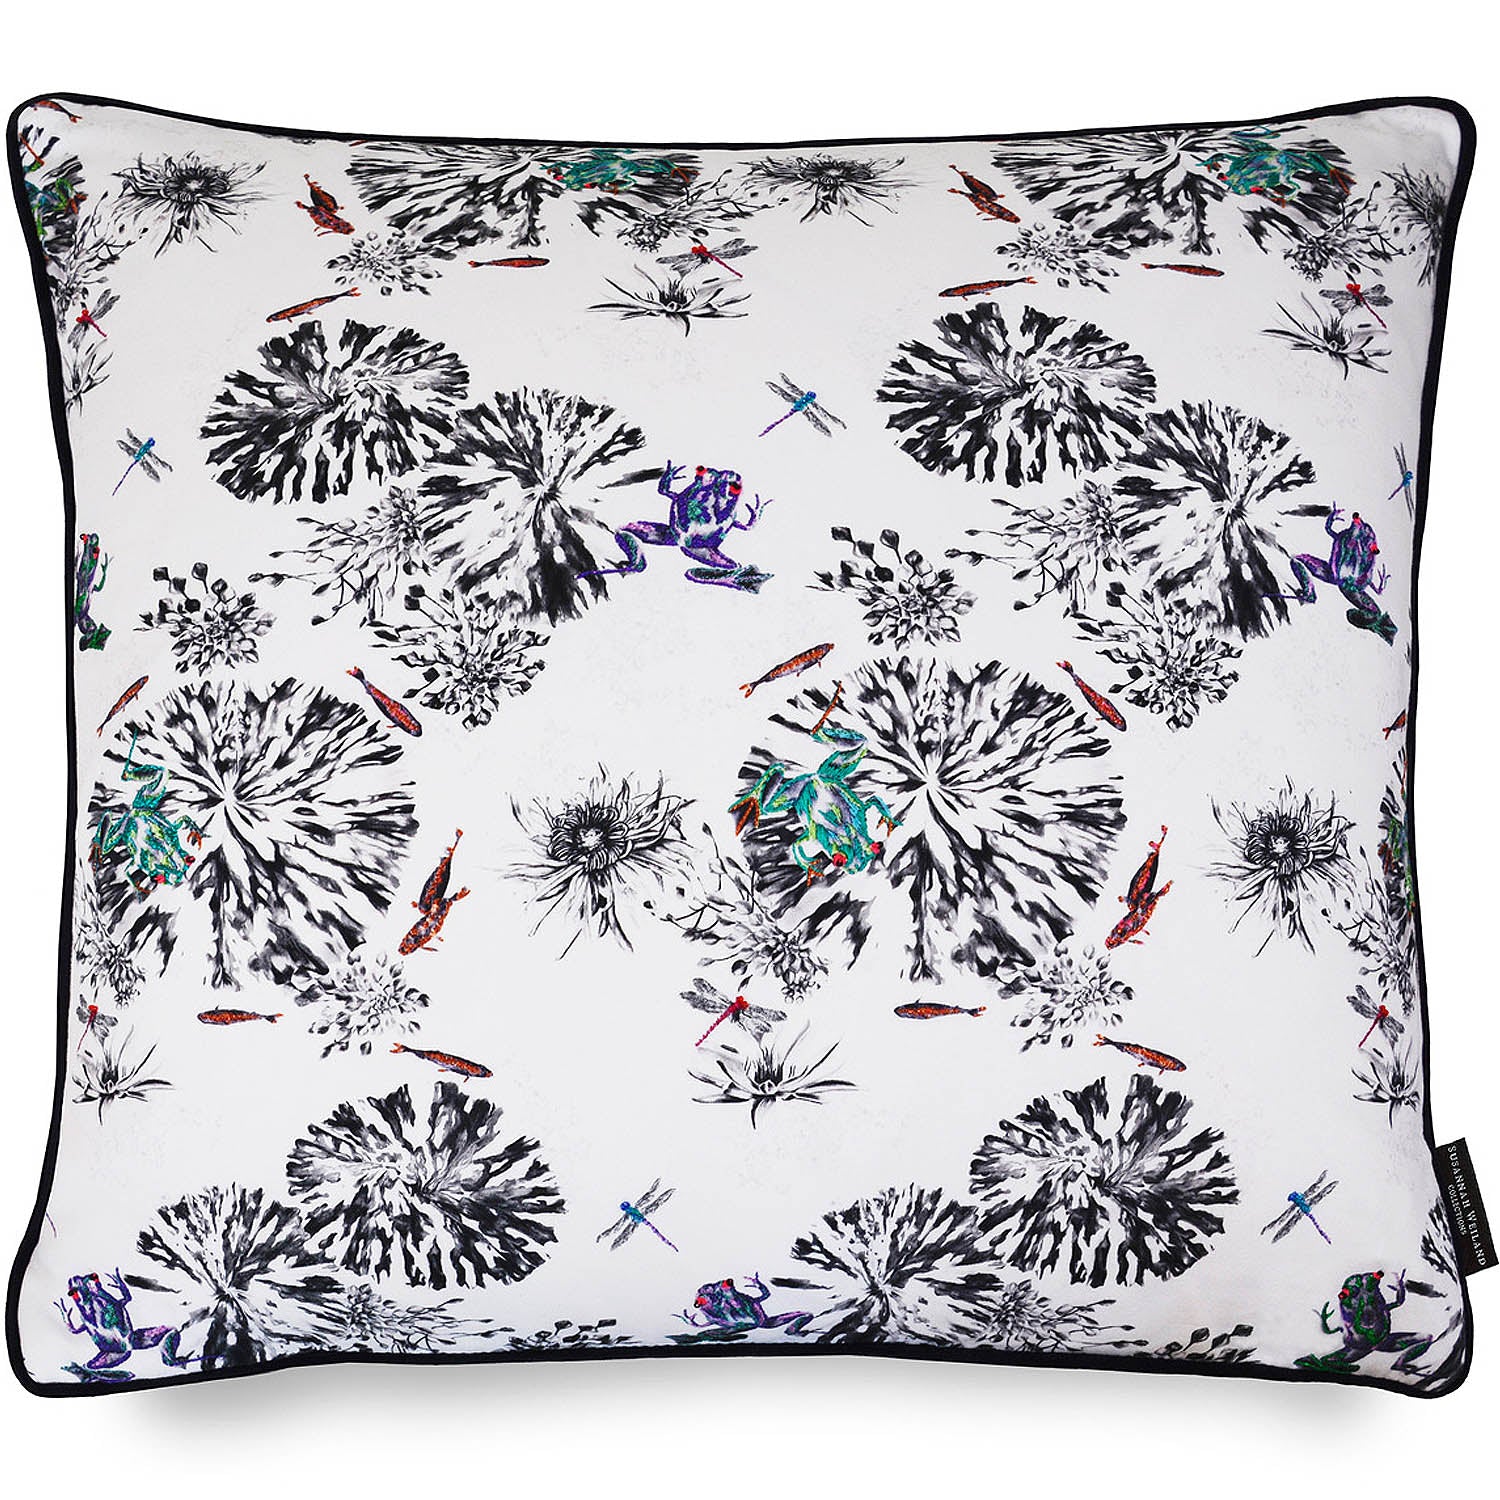 Botanical cushion with hand embroidered frogs and fish